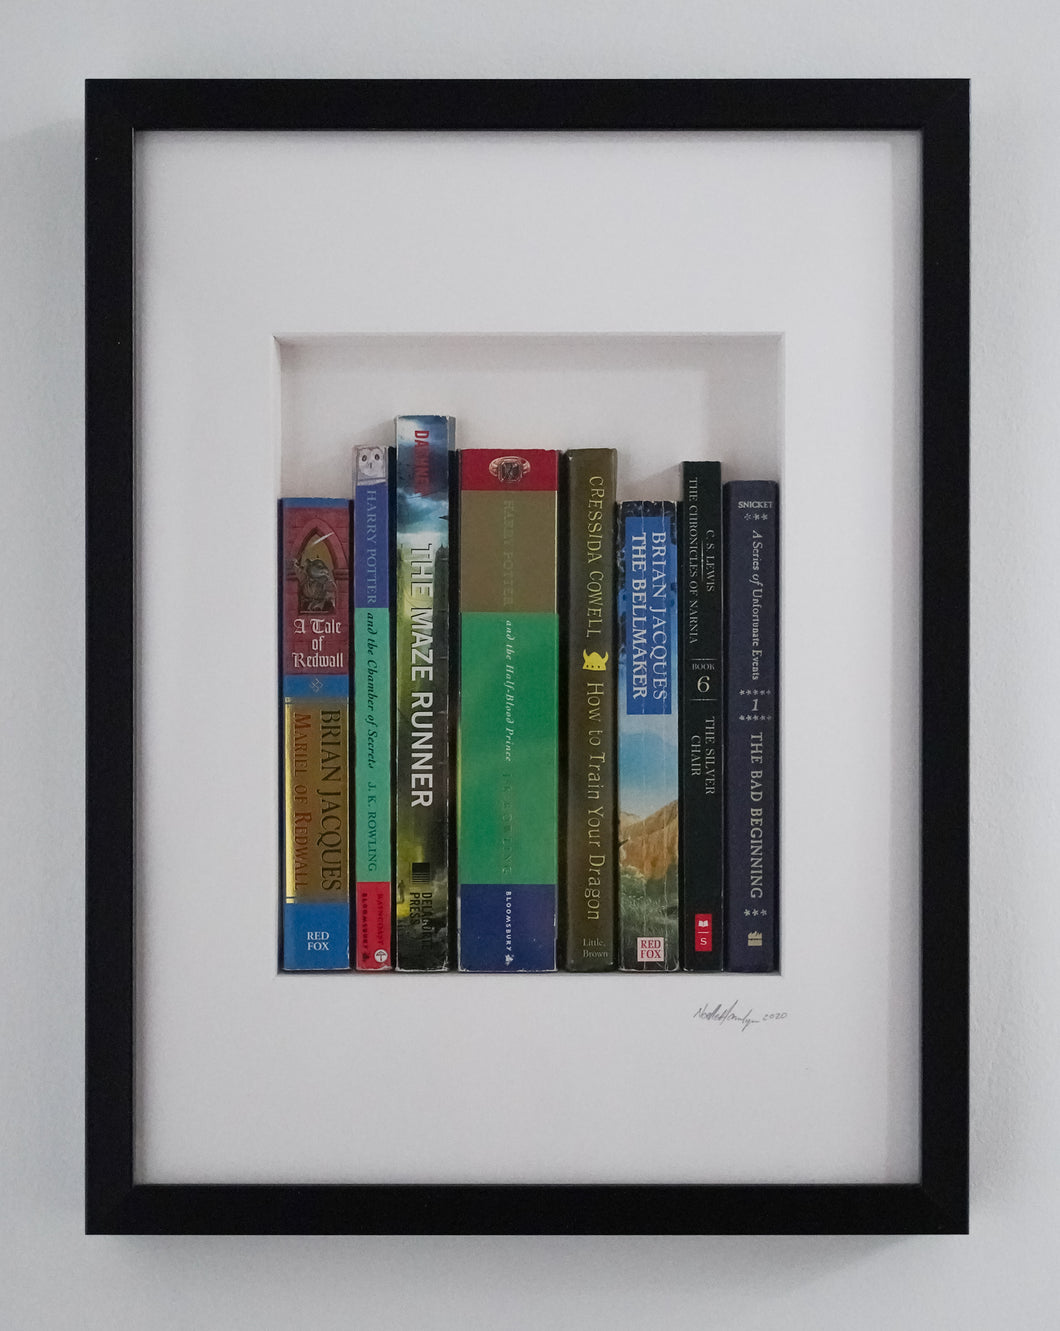 SOLD Small Library - Harry Potter